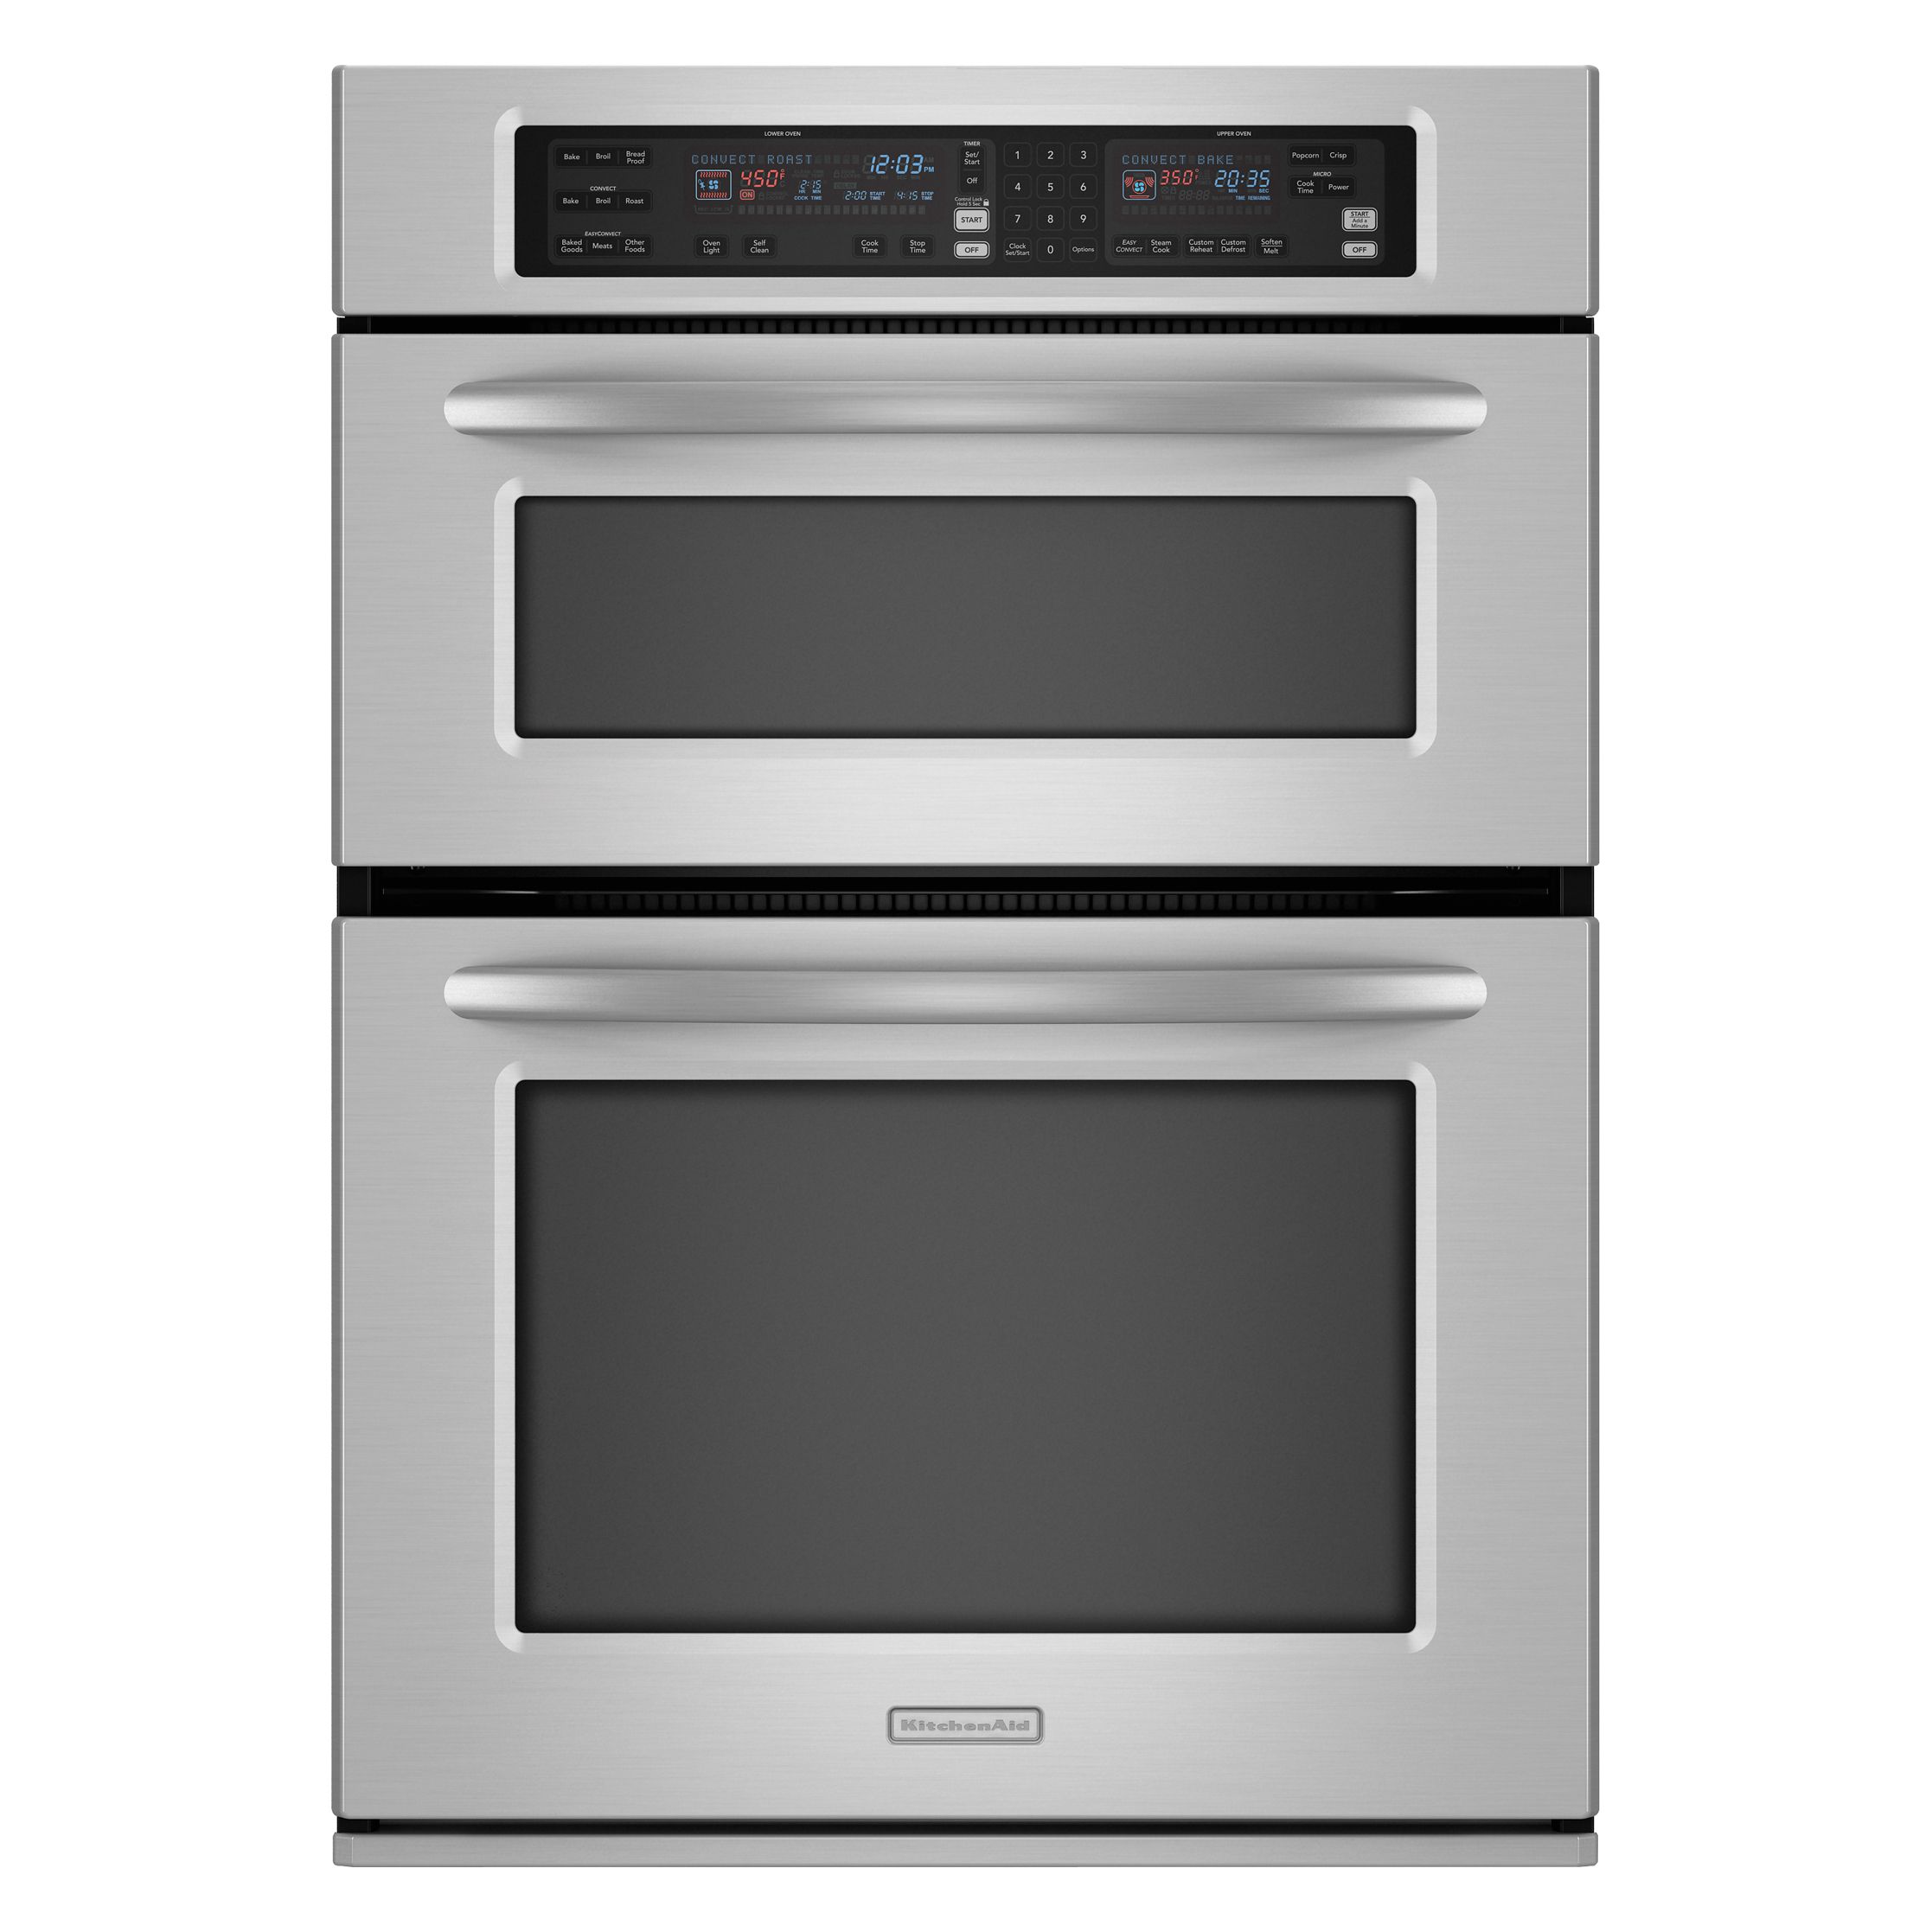 27" Electric Built-In Oven/Microwave Combo logo